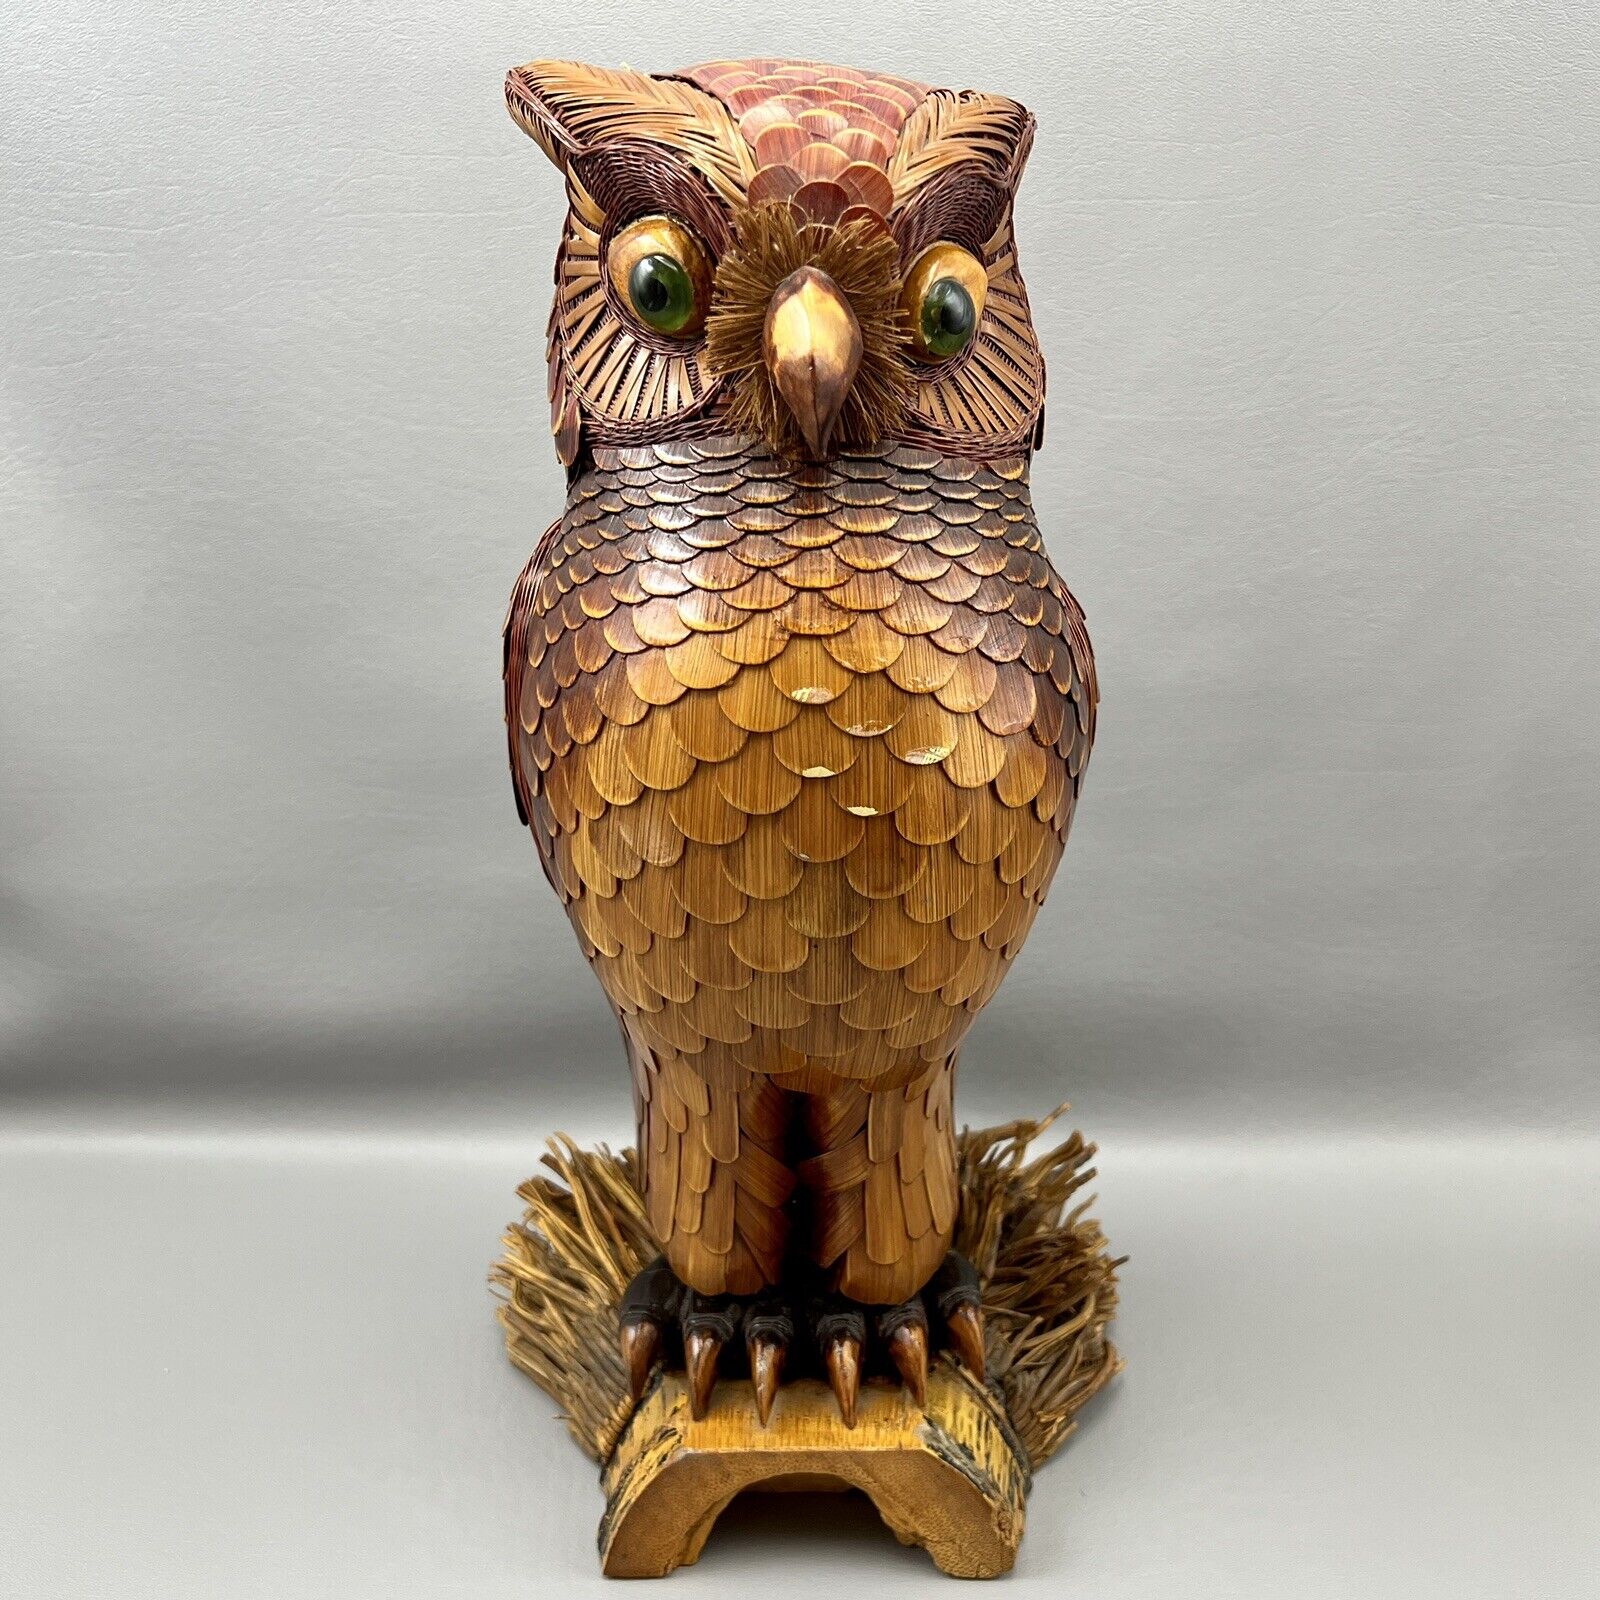 Vintage Mid Century Large Chinese Owl By Shanghai Handicrafts From The People\'s